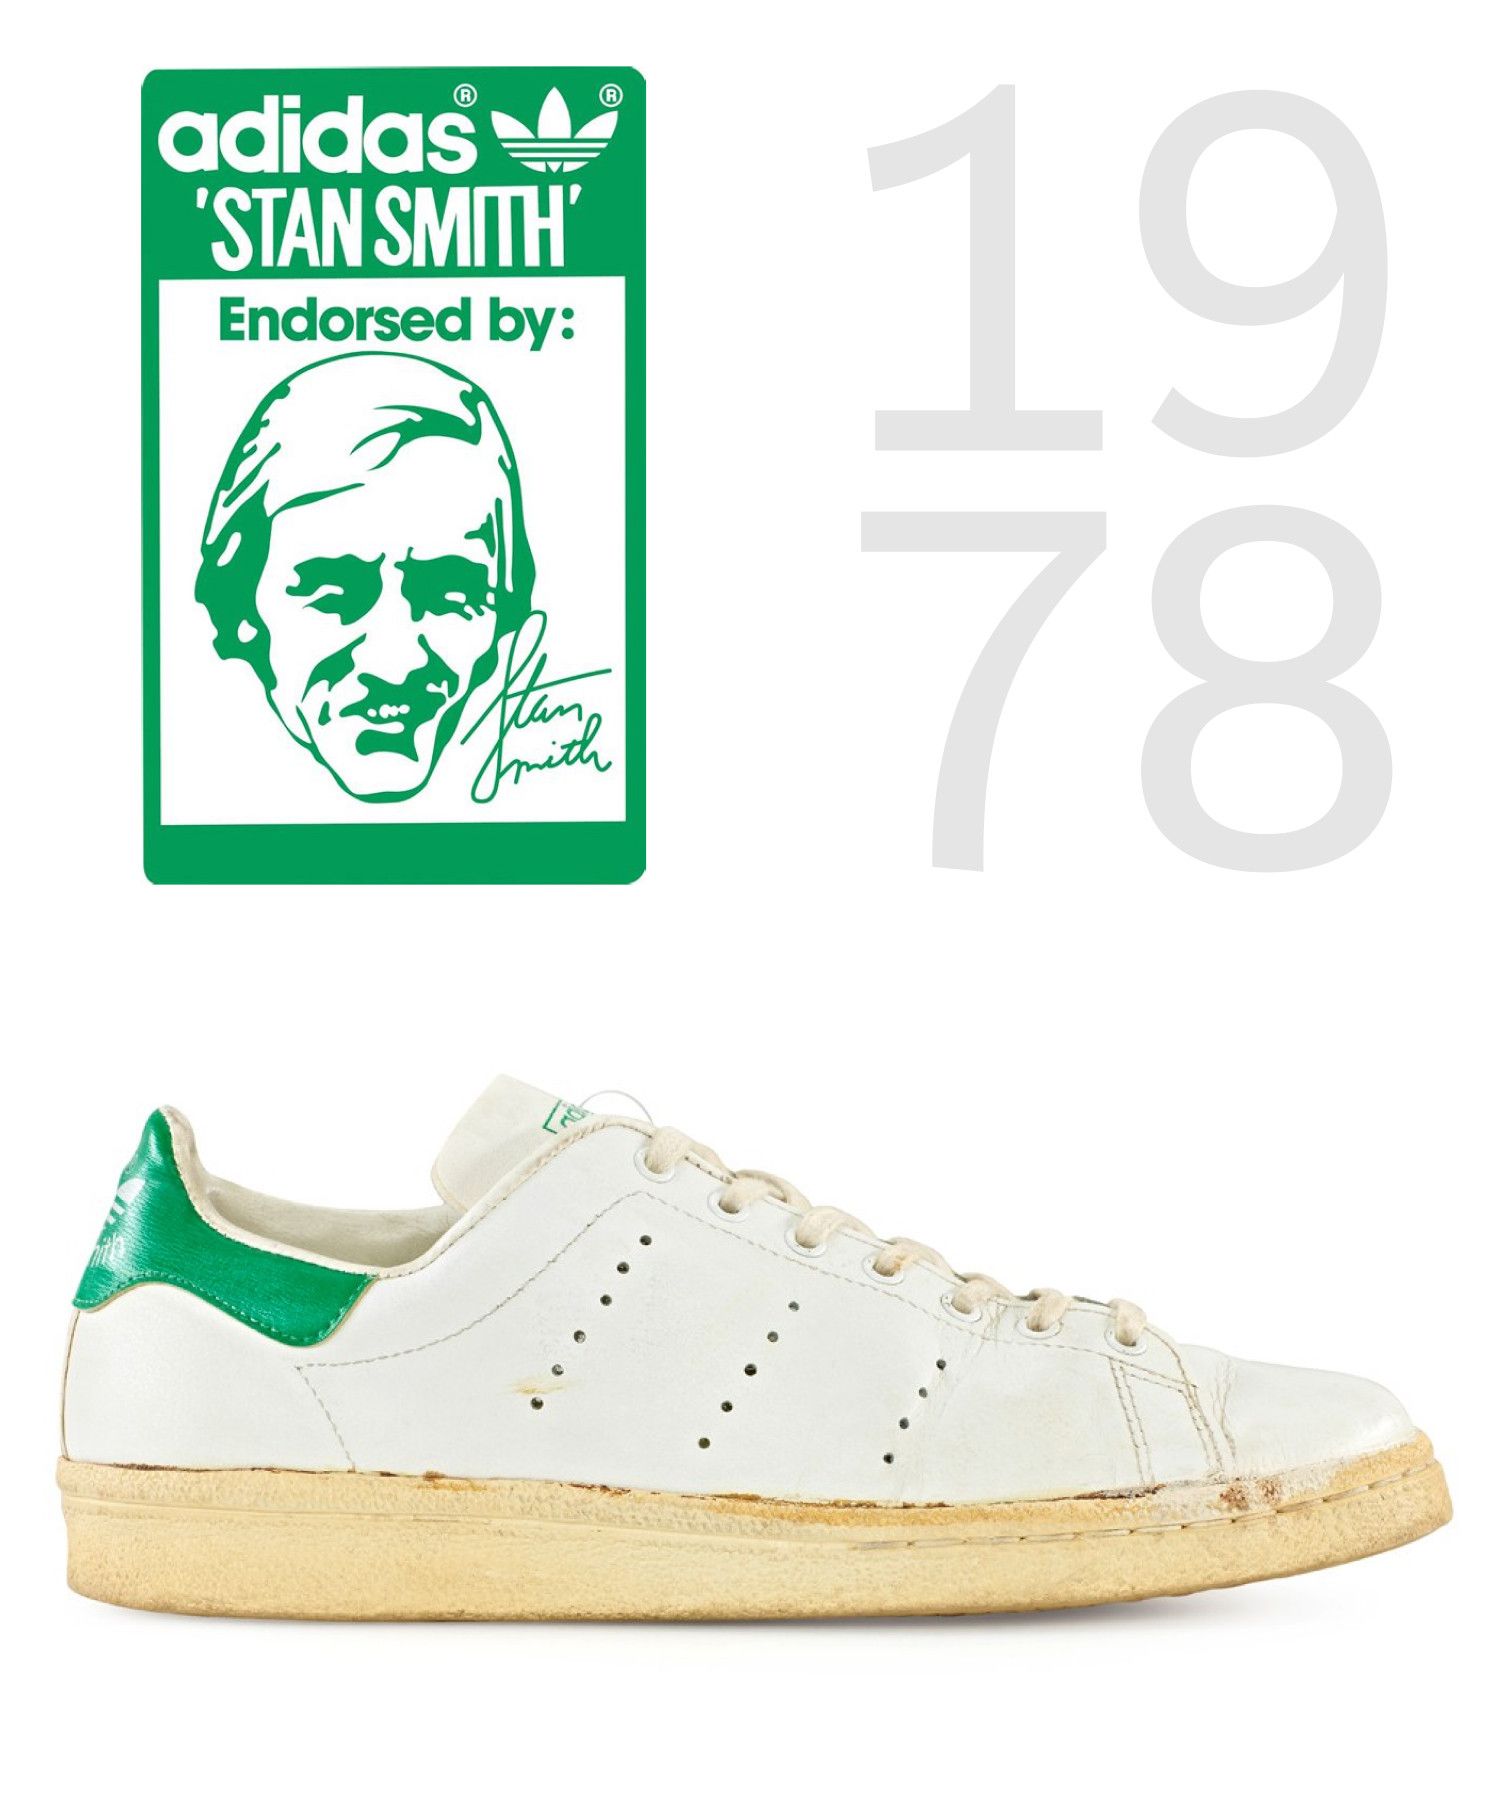 The Past, Present and Future of the adidas Stan Smith | GOAT